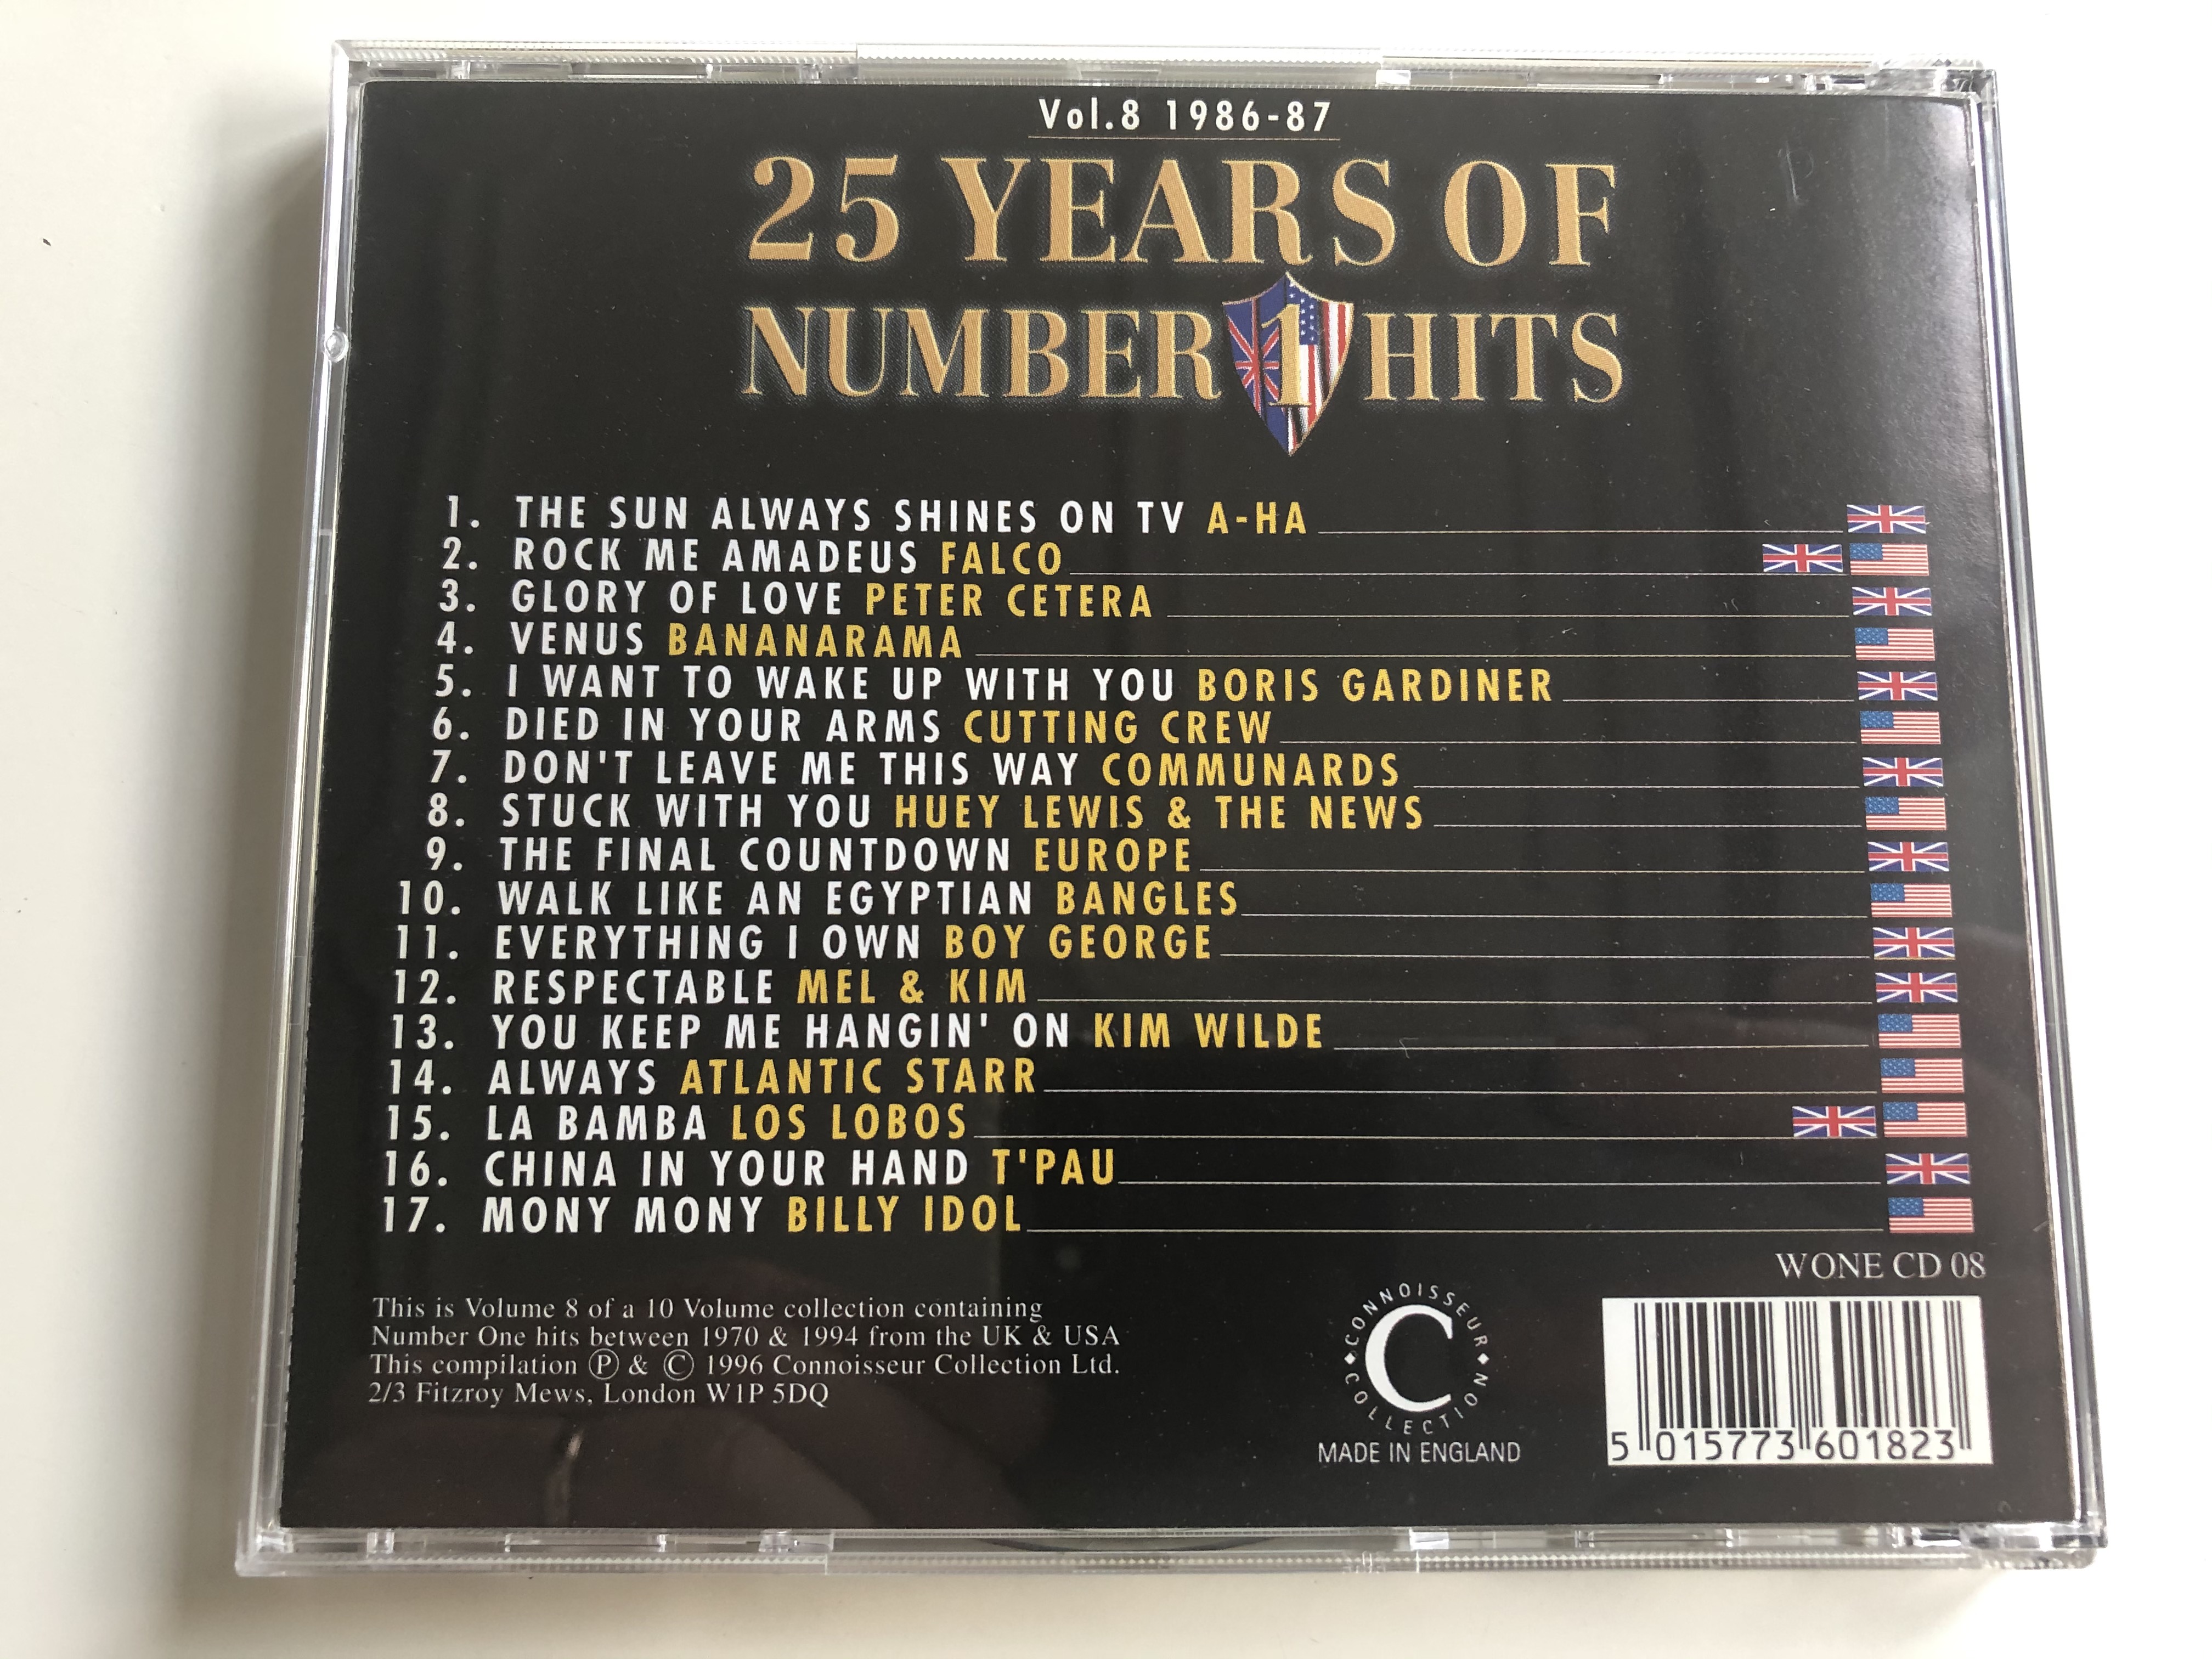 25-years-of-number-1-hits-vol.-8-1986-87-connoisseur-collection-audio-cd-1996-wone-cd-08-5-.jpg